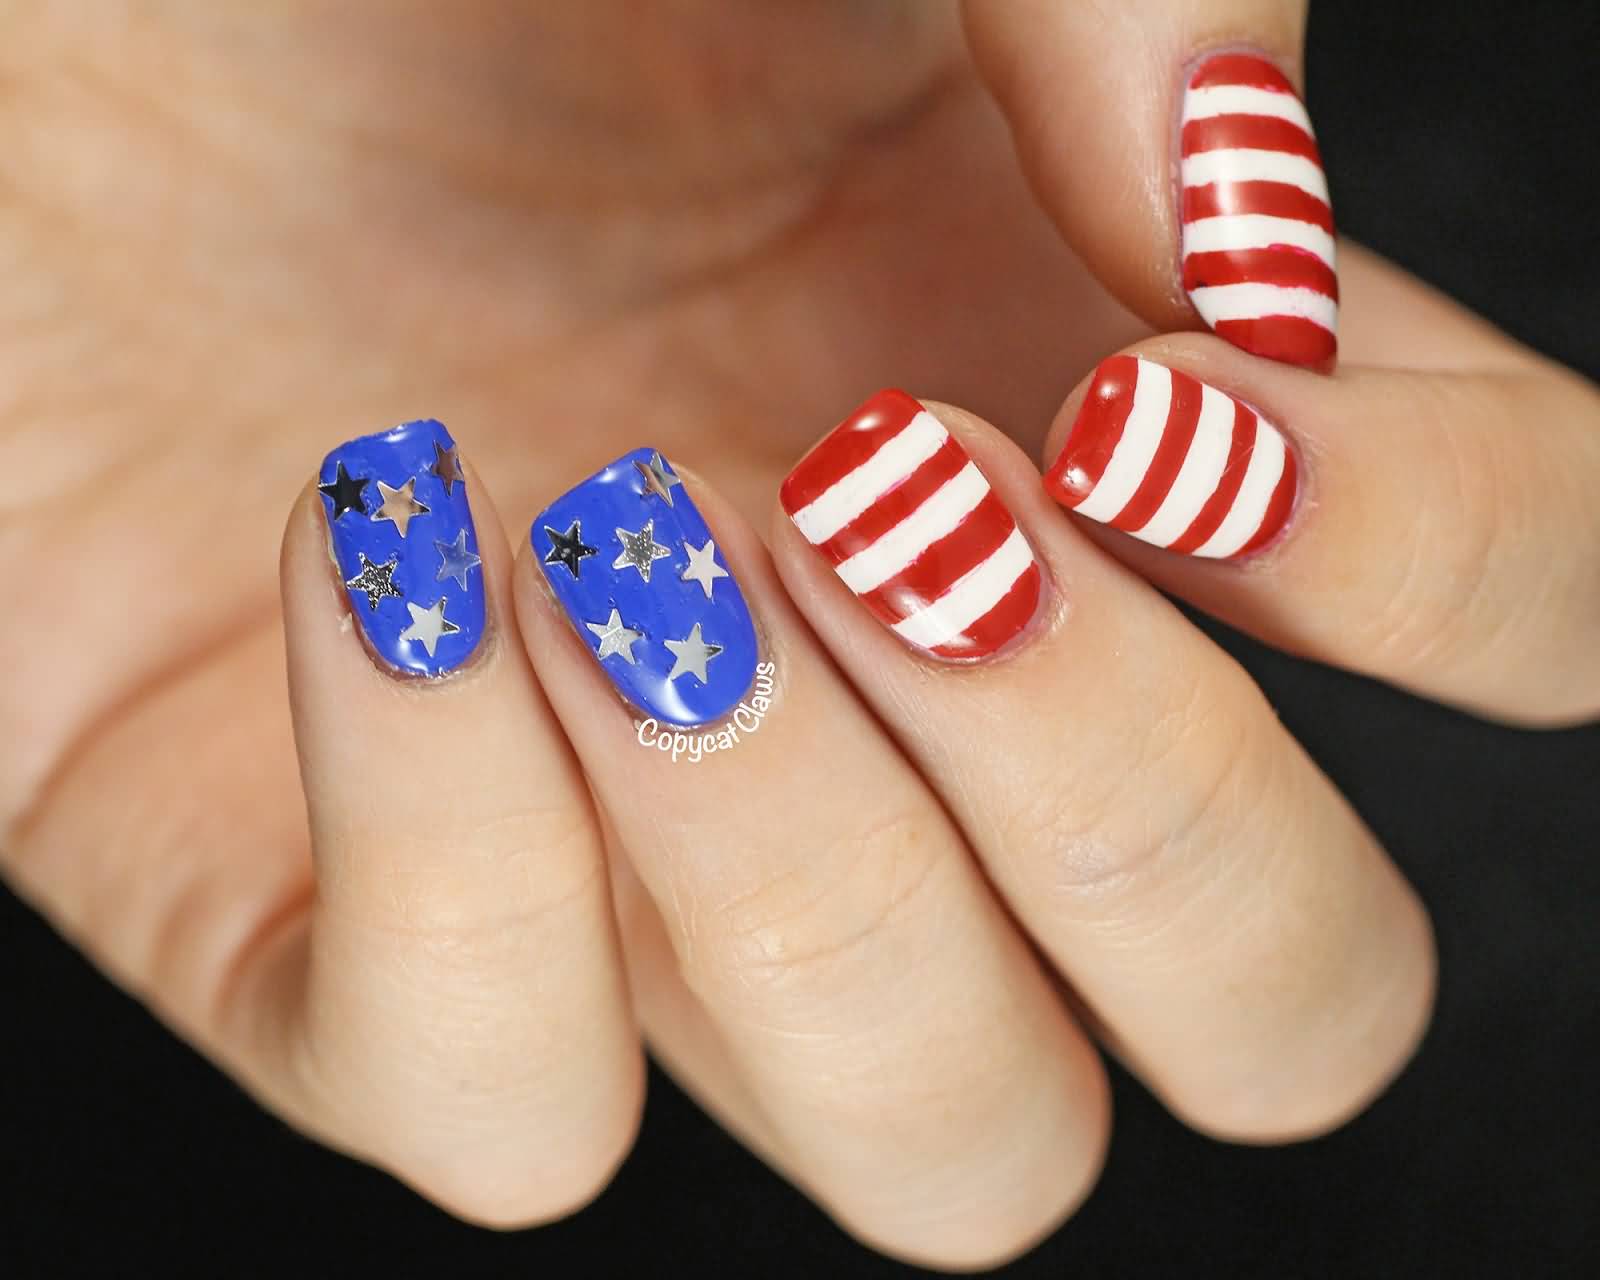 White Stripes On Red Nails And Blue Nails With Stars Fourth Of July Nail Art